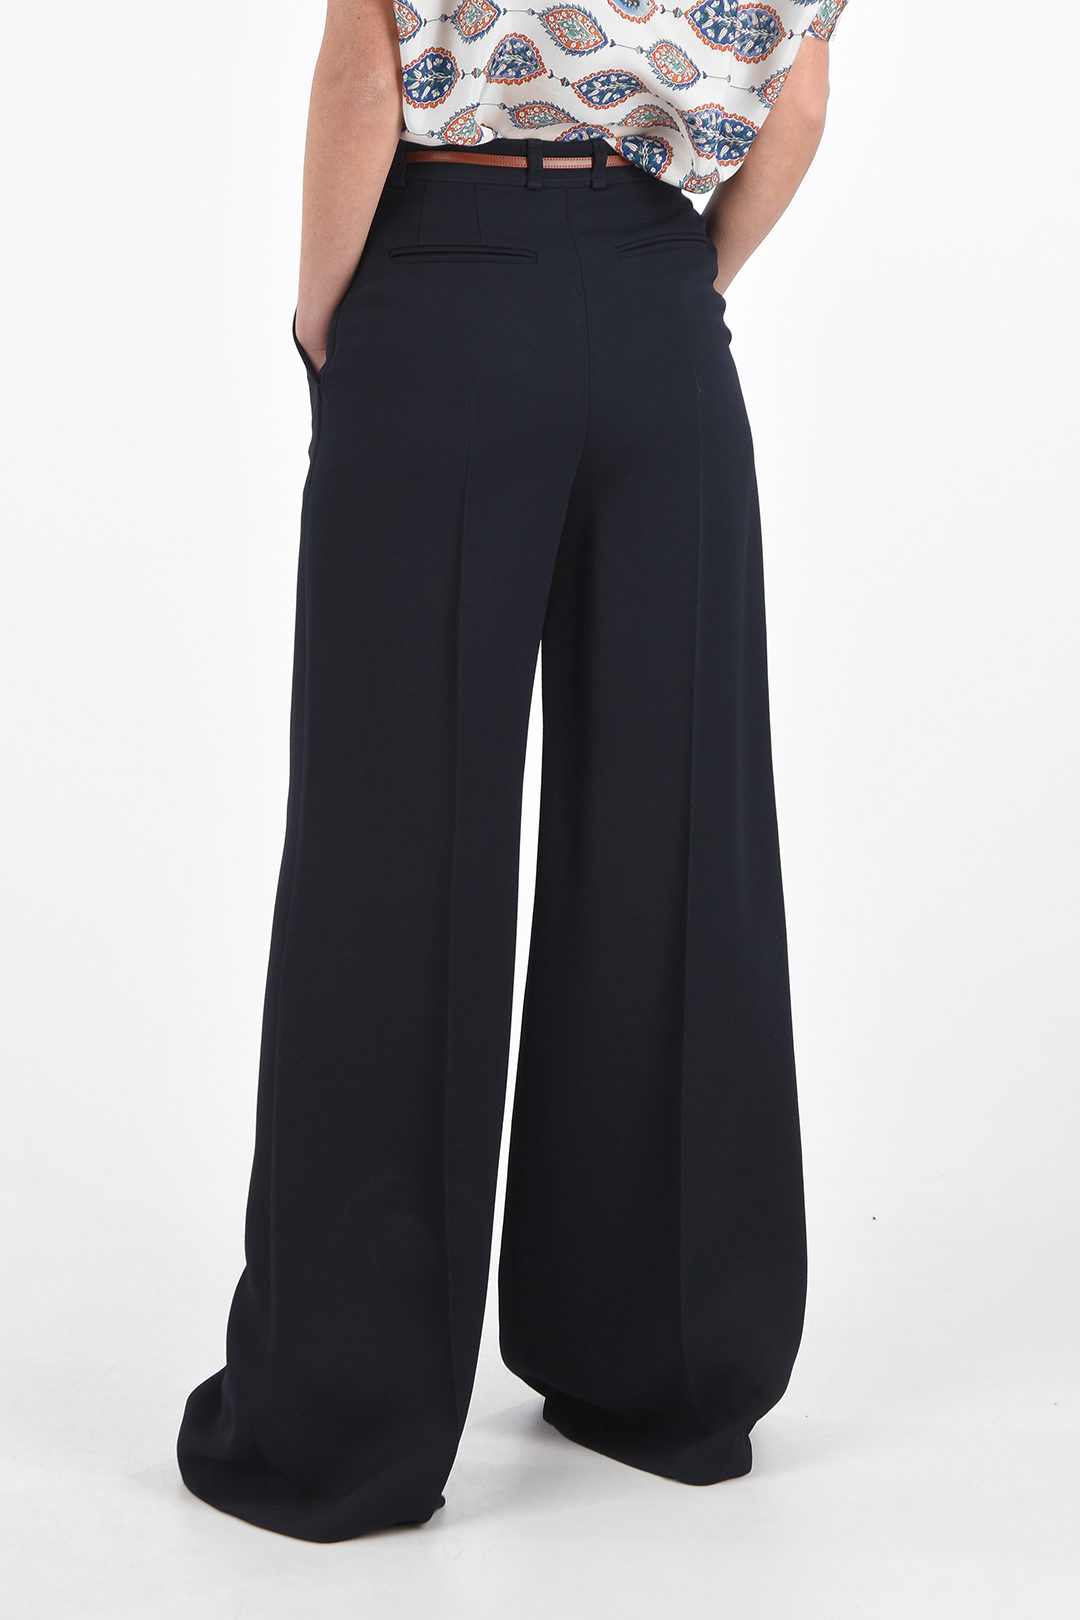 Chloe Tailored High-waisted Wide-leg Pants with Contrasting Belt women -  Glamood Outlet